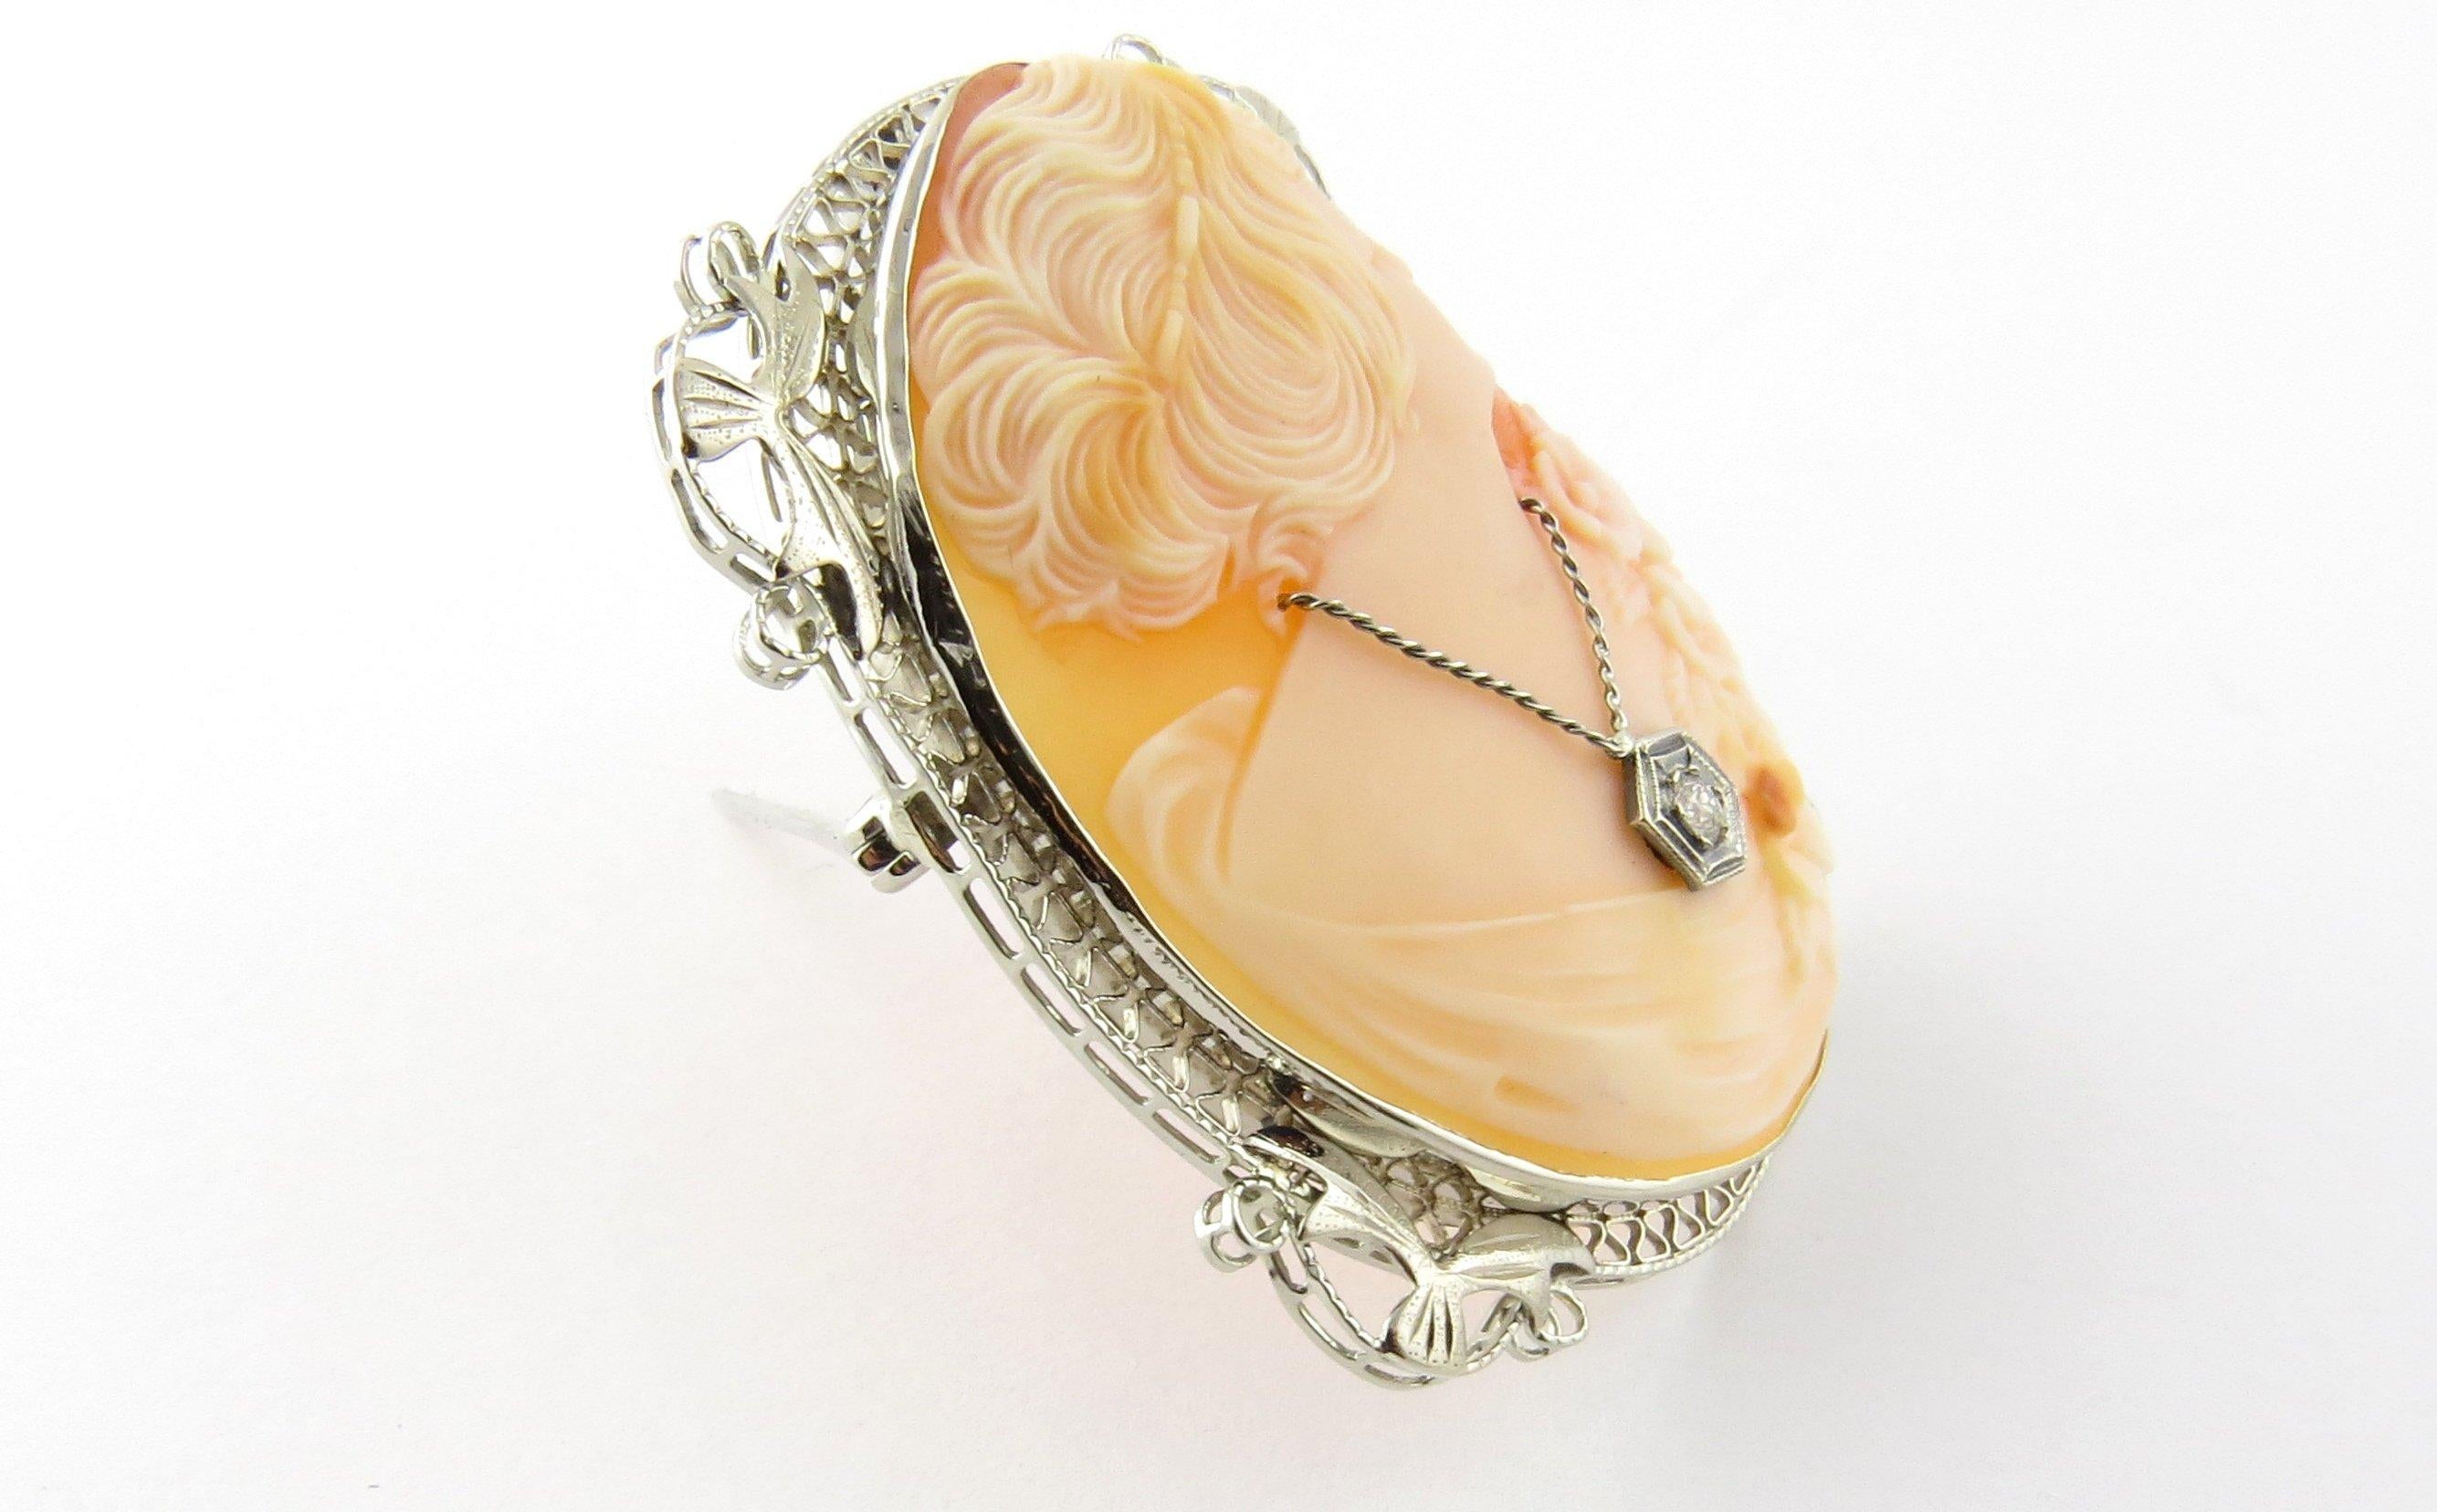 Vintage 14 Karat White Gold and Diamond Cameo Brooch/Pendant- 
These stunning cameo features a lovely lady in profile accented with one European cut diamond and framed in delicate white gold filigree. 
Approximate total diamond weight: .03 ct.